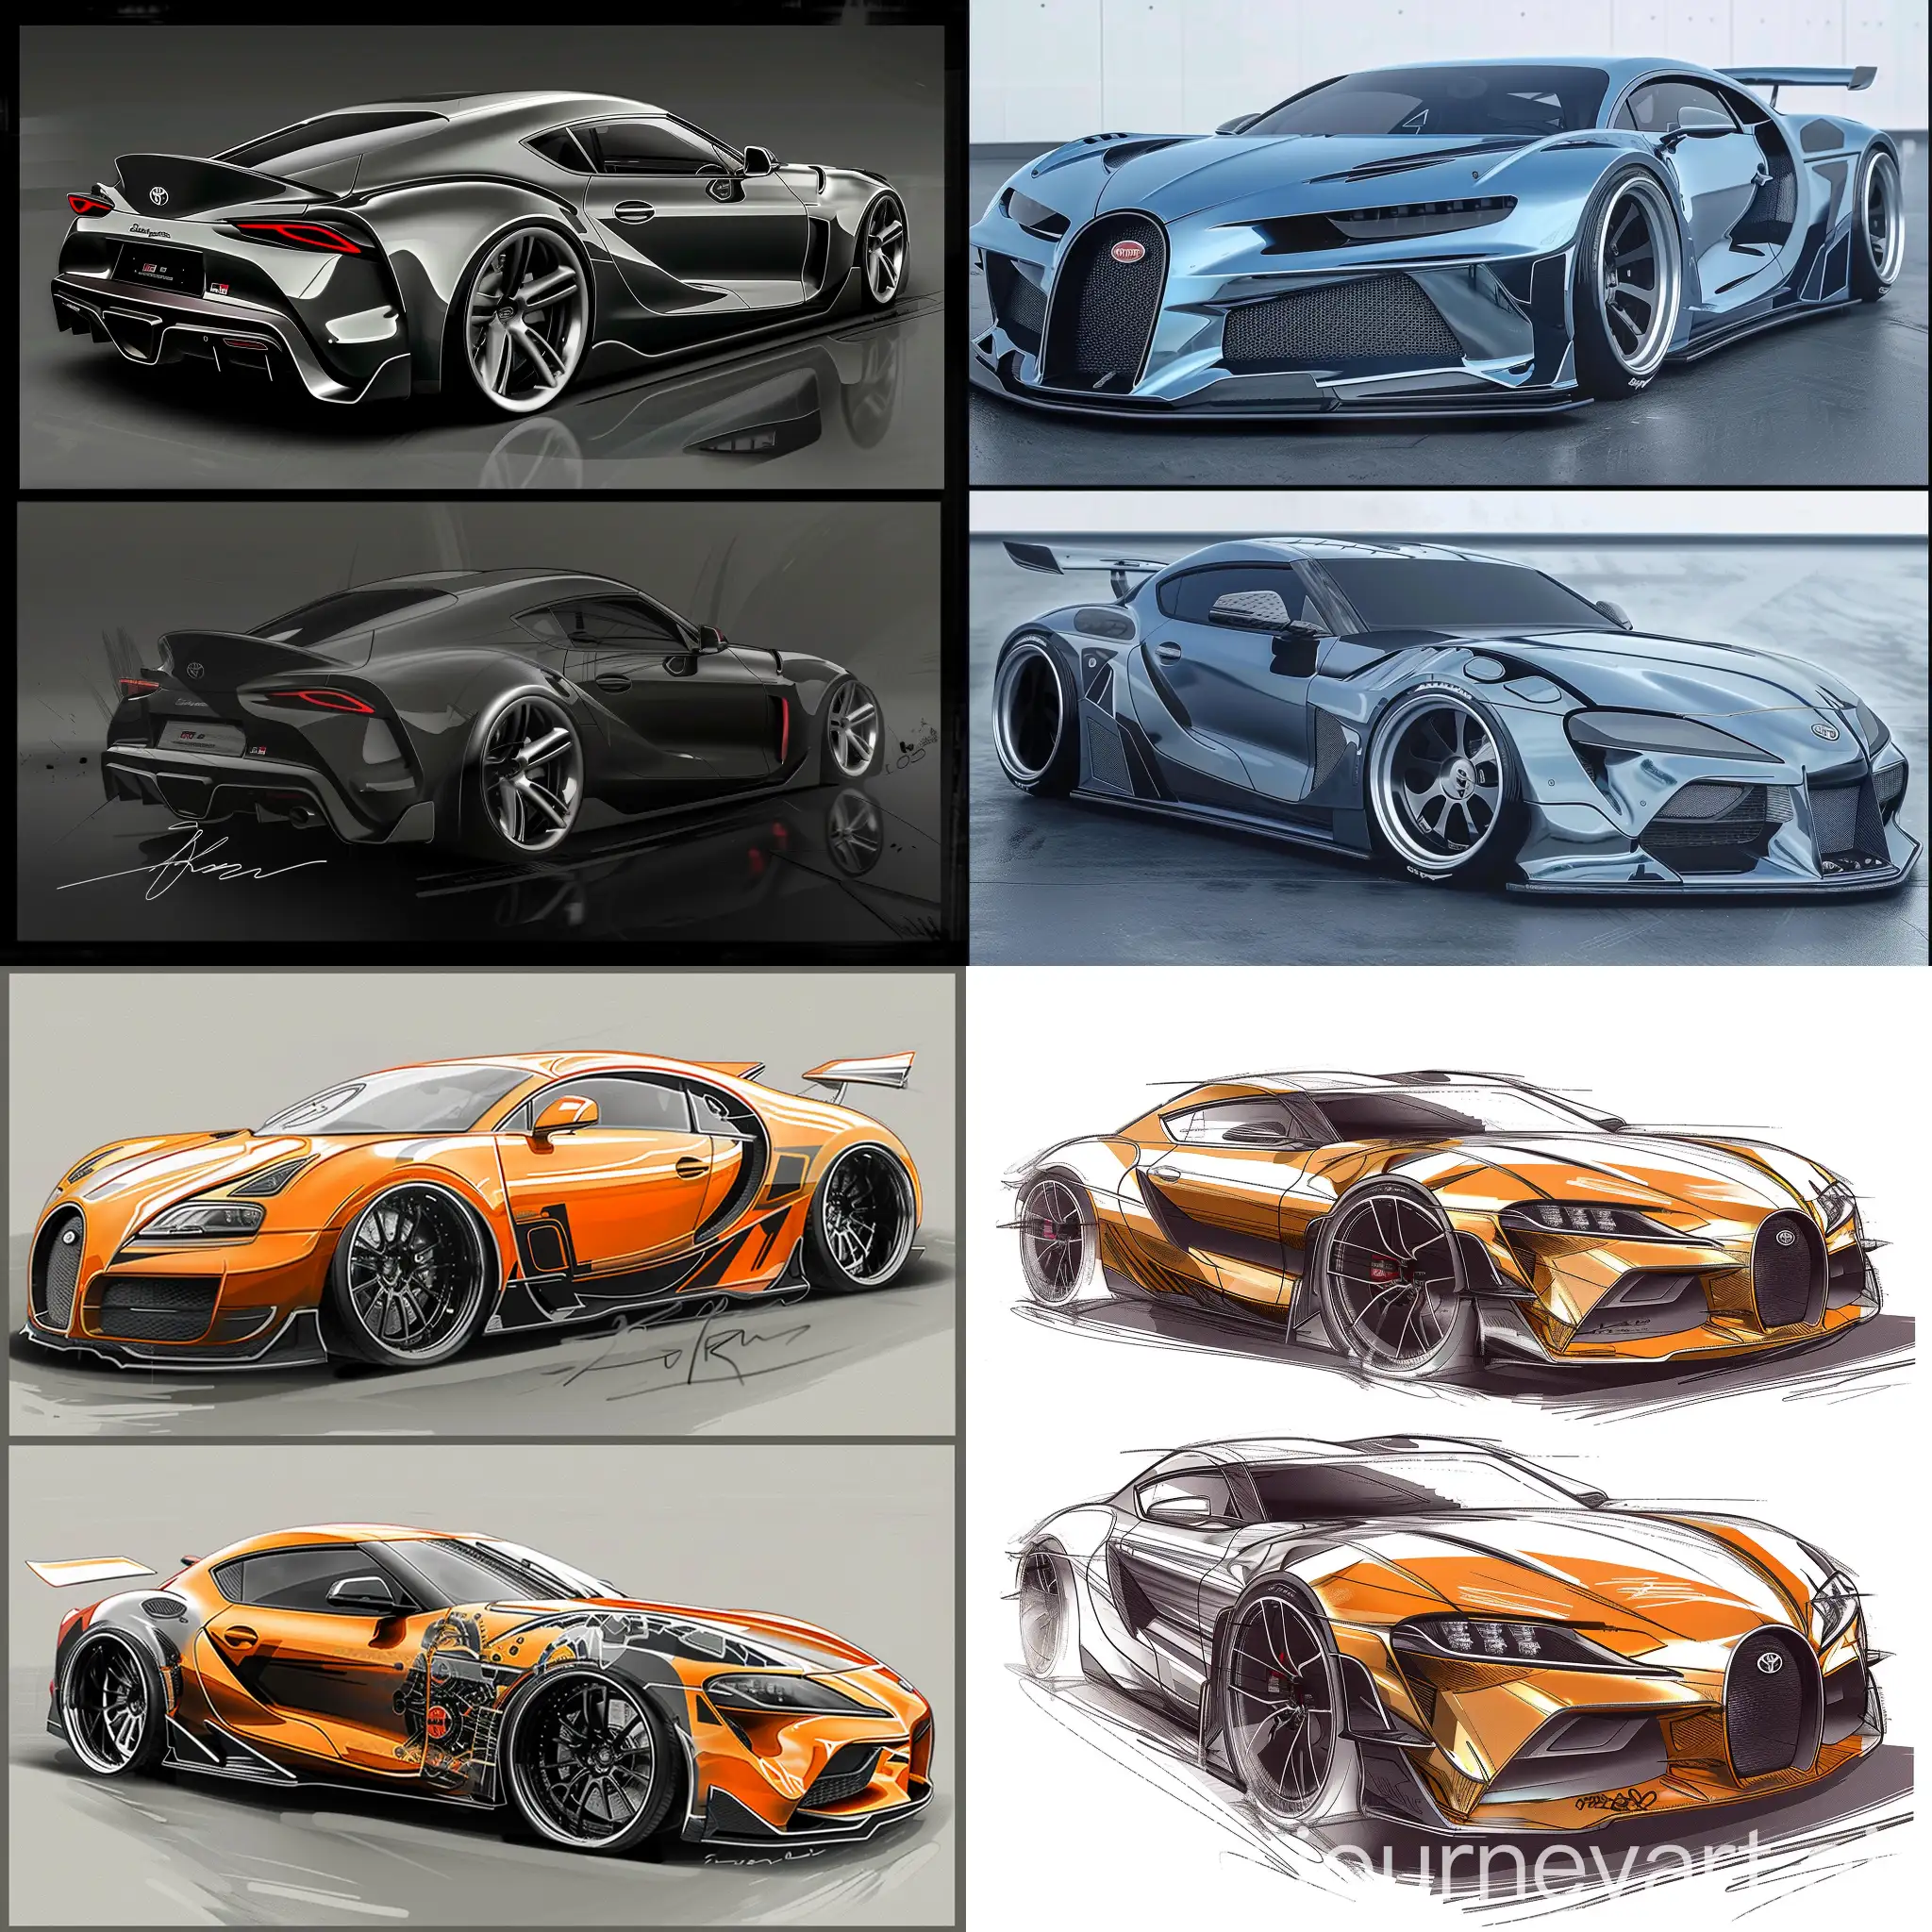 A concept design of a car, combining elements of a Bugatti Veyron and a Toyota Supra Mk4.